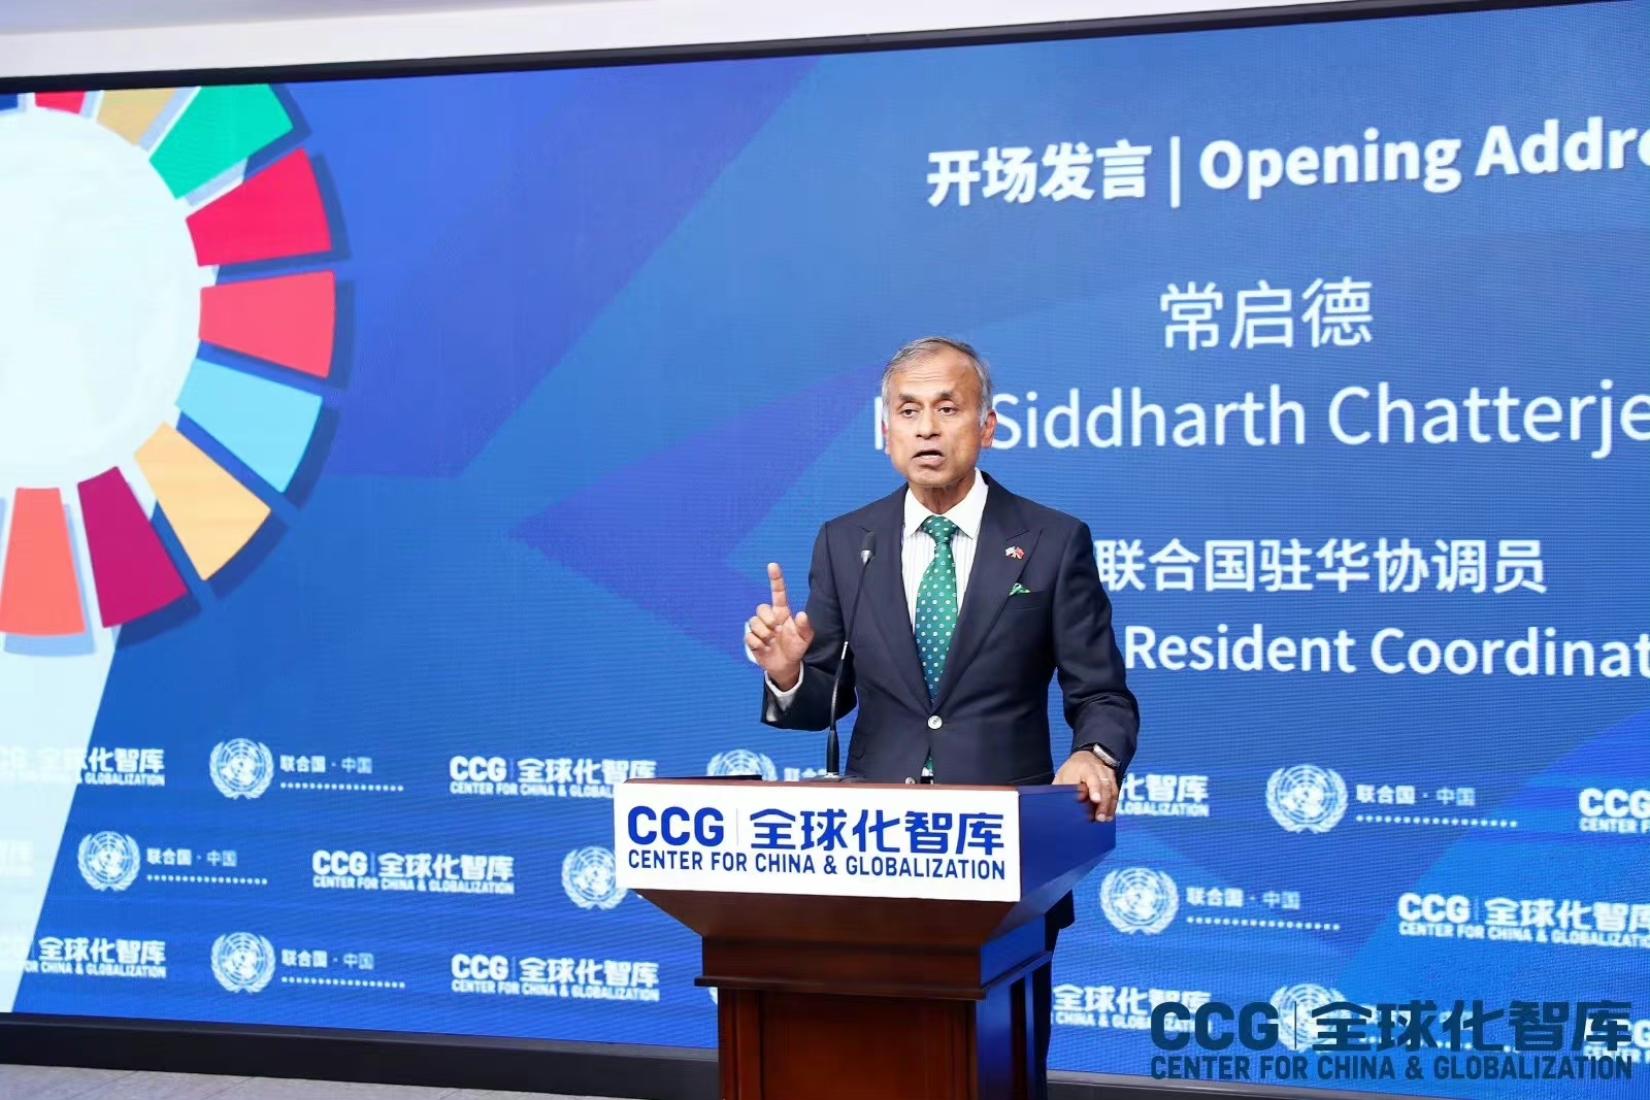 UN Resident Coordinator in China Siddharth Chatterjee at the Accelerating Progress towards 2030 Agenda: China’s Progress, Challenges, and Path Forward Forum